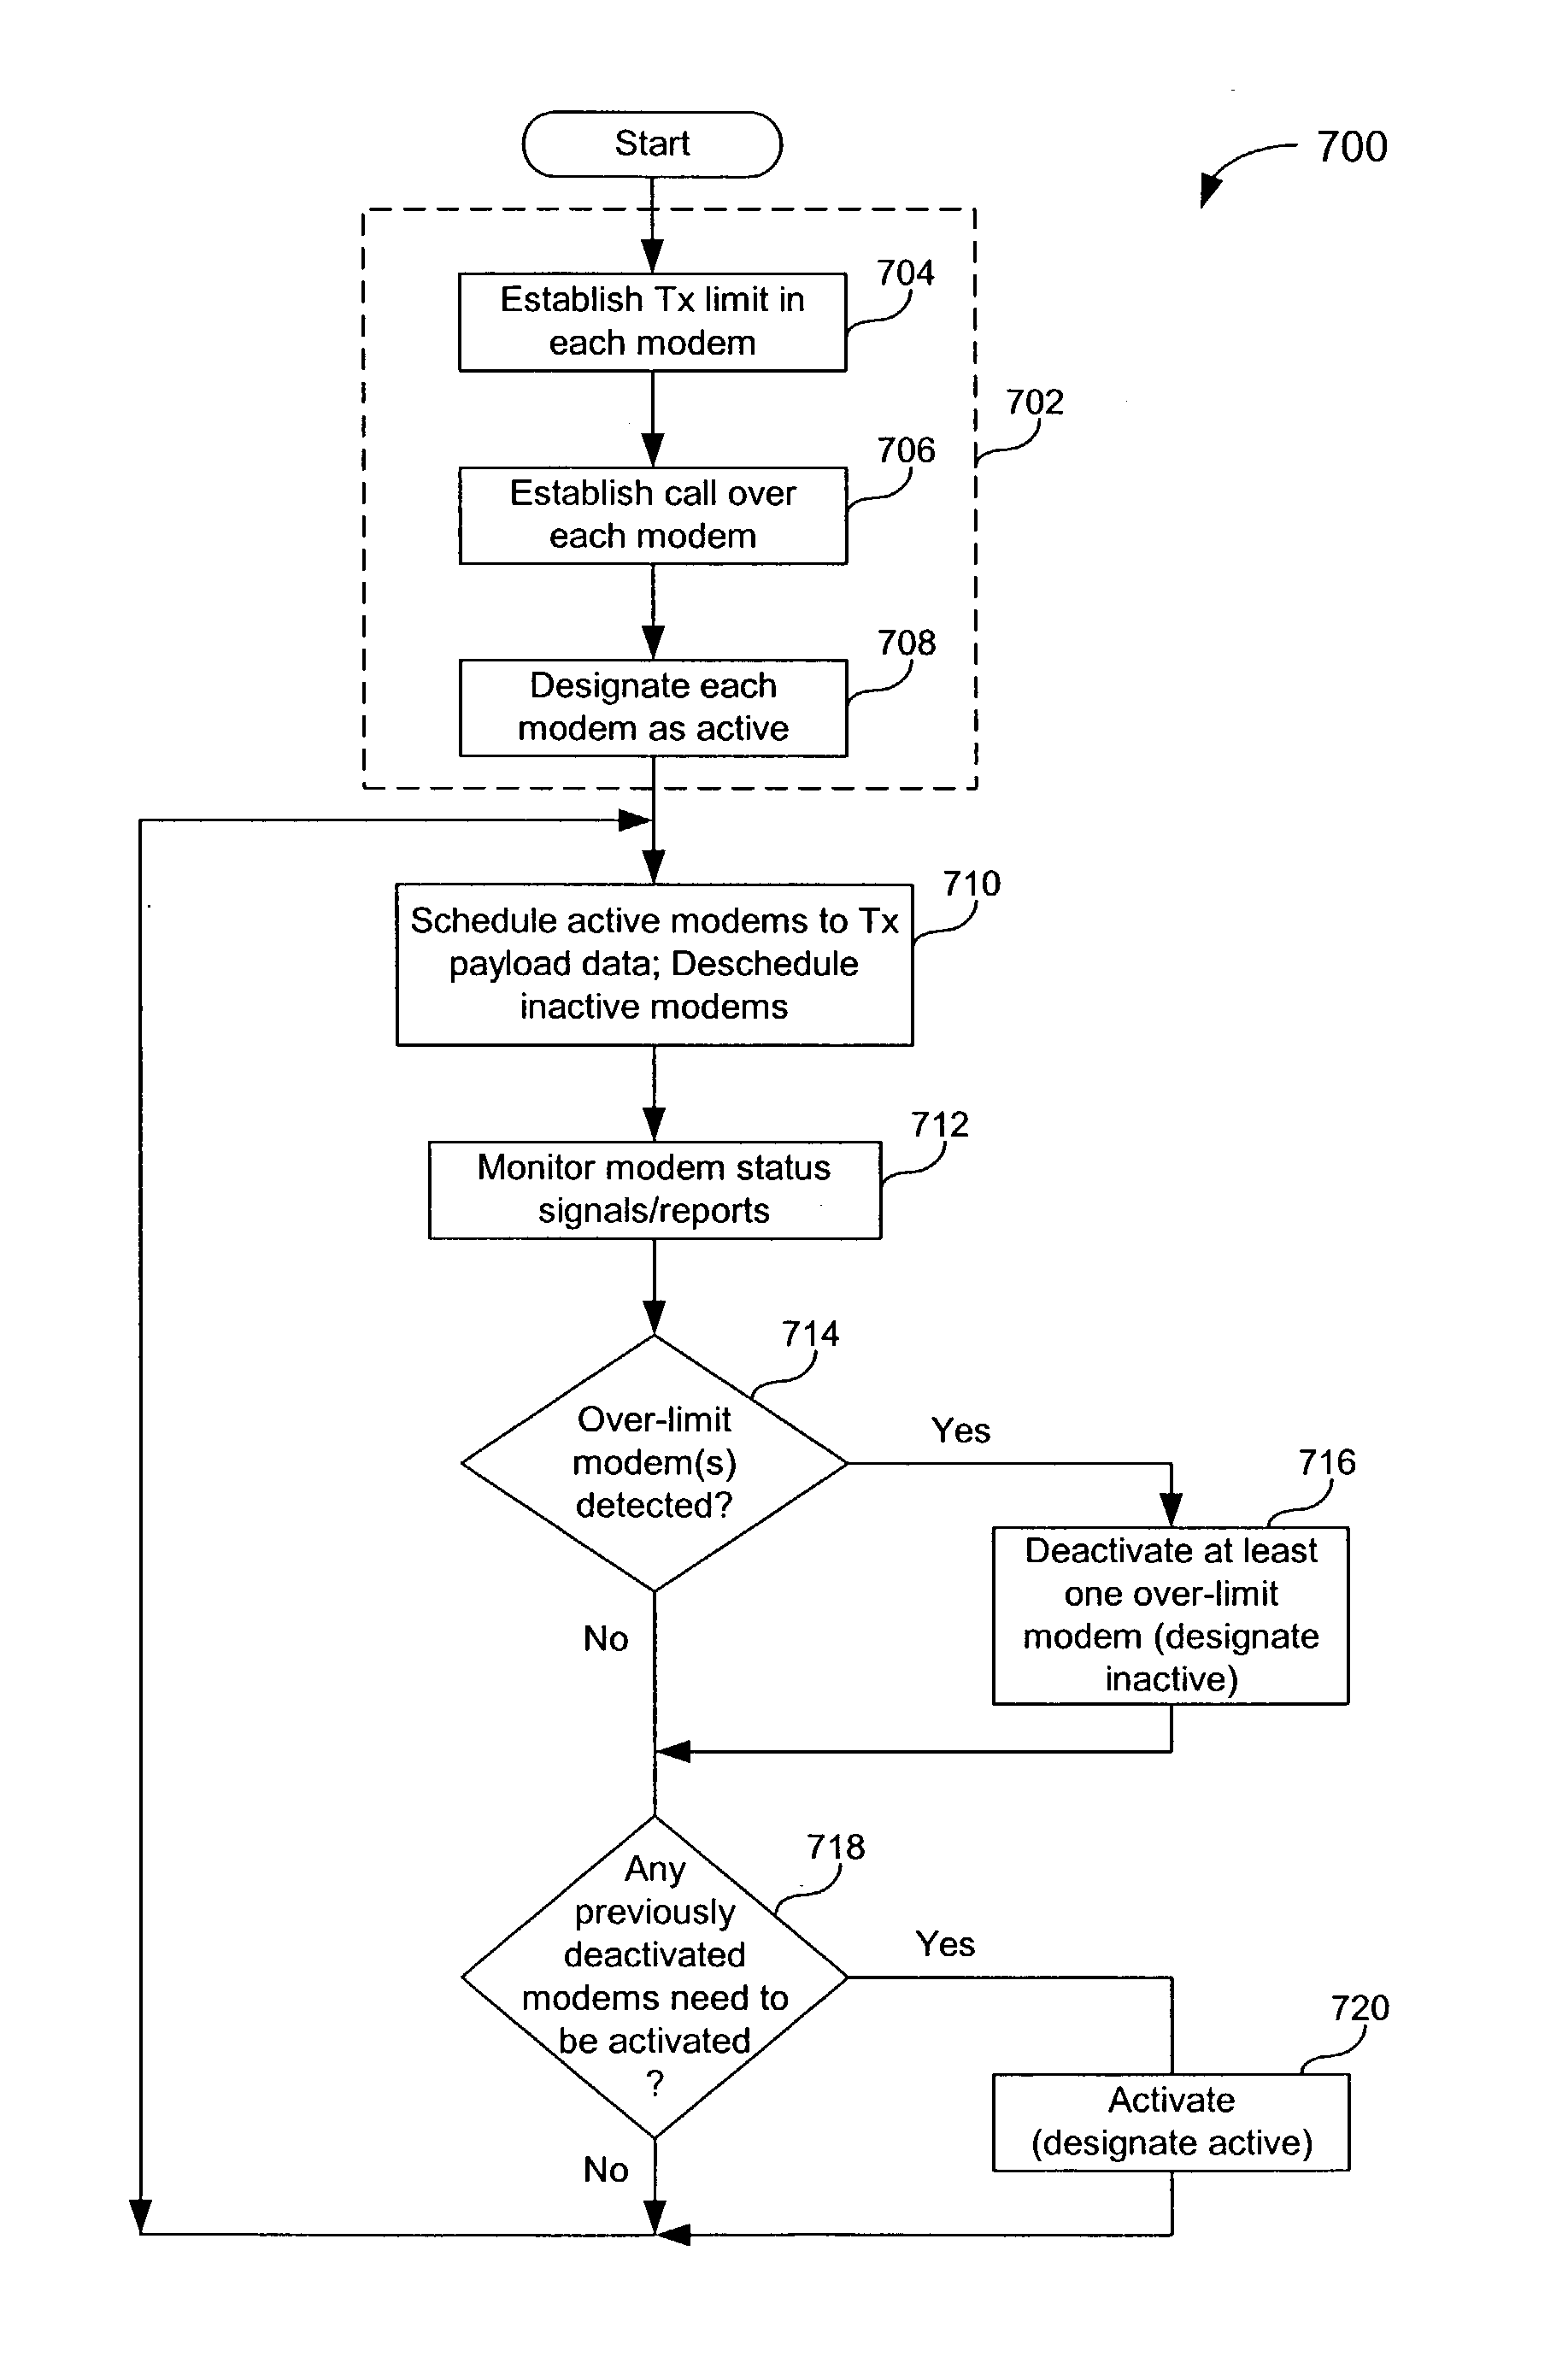 Wireless terminal operating under an aggregate transmit power limit using multiple modems having fixed individual transmit power limits